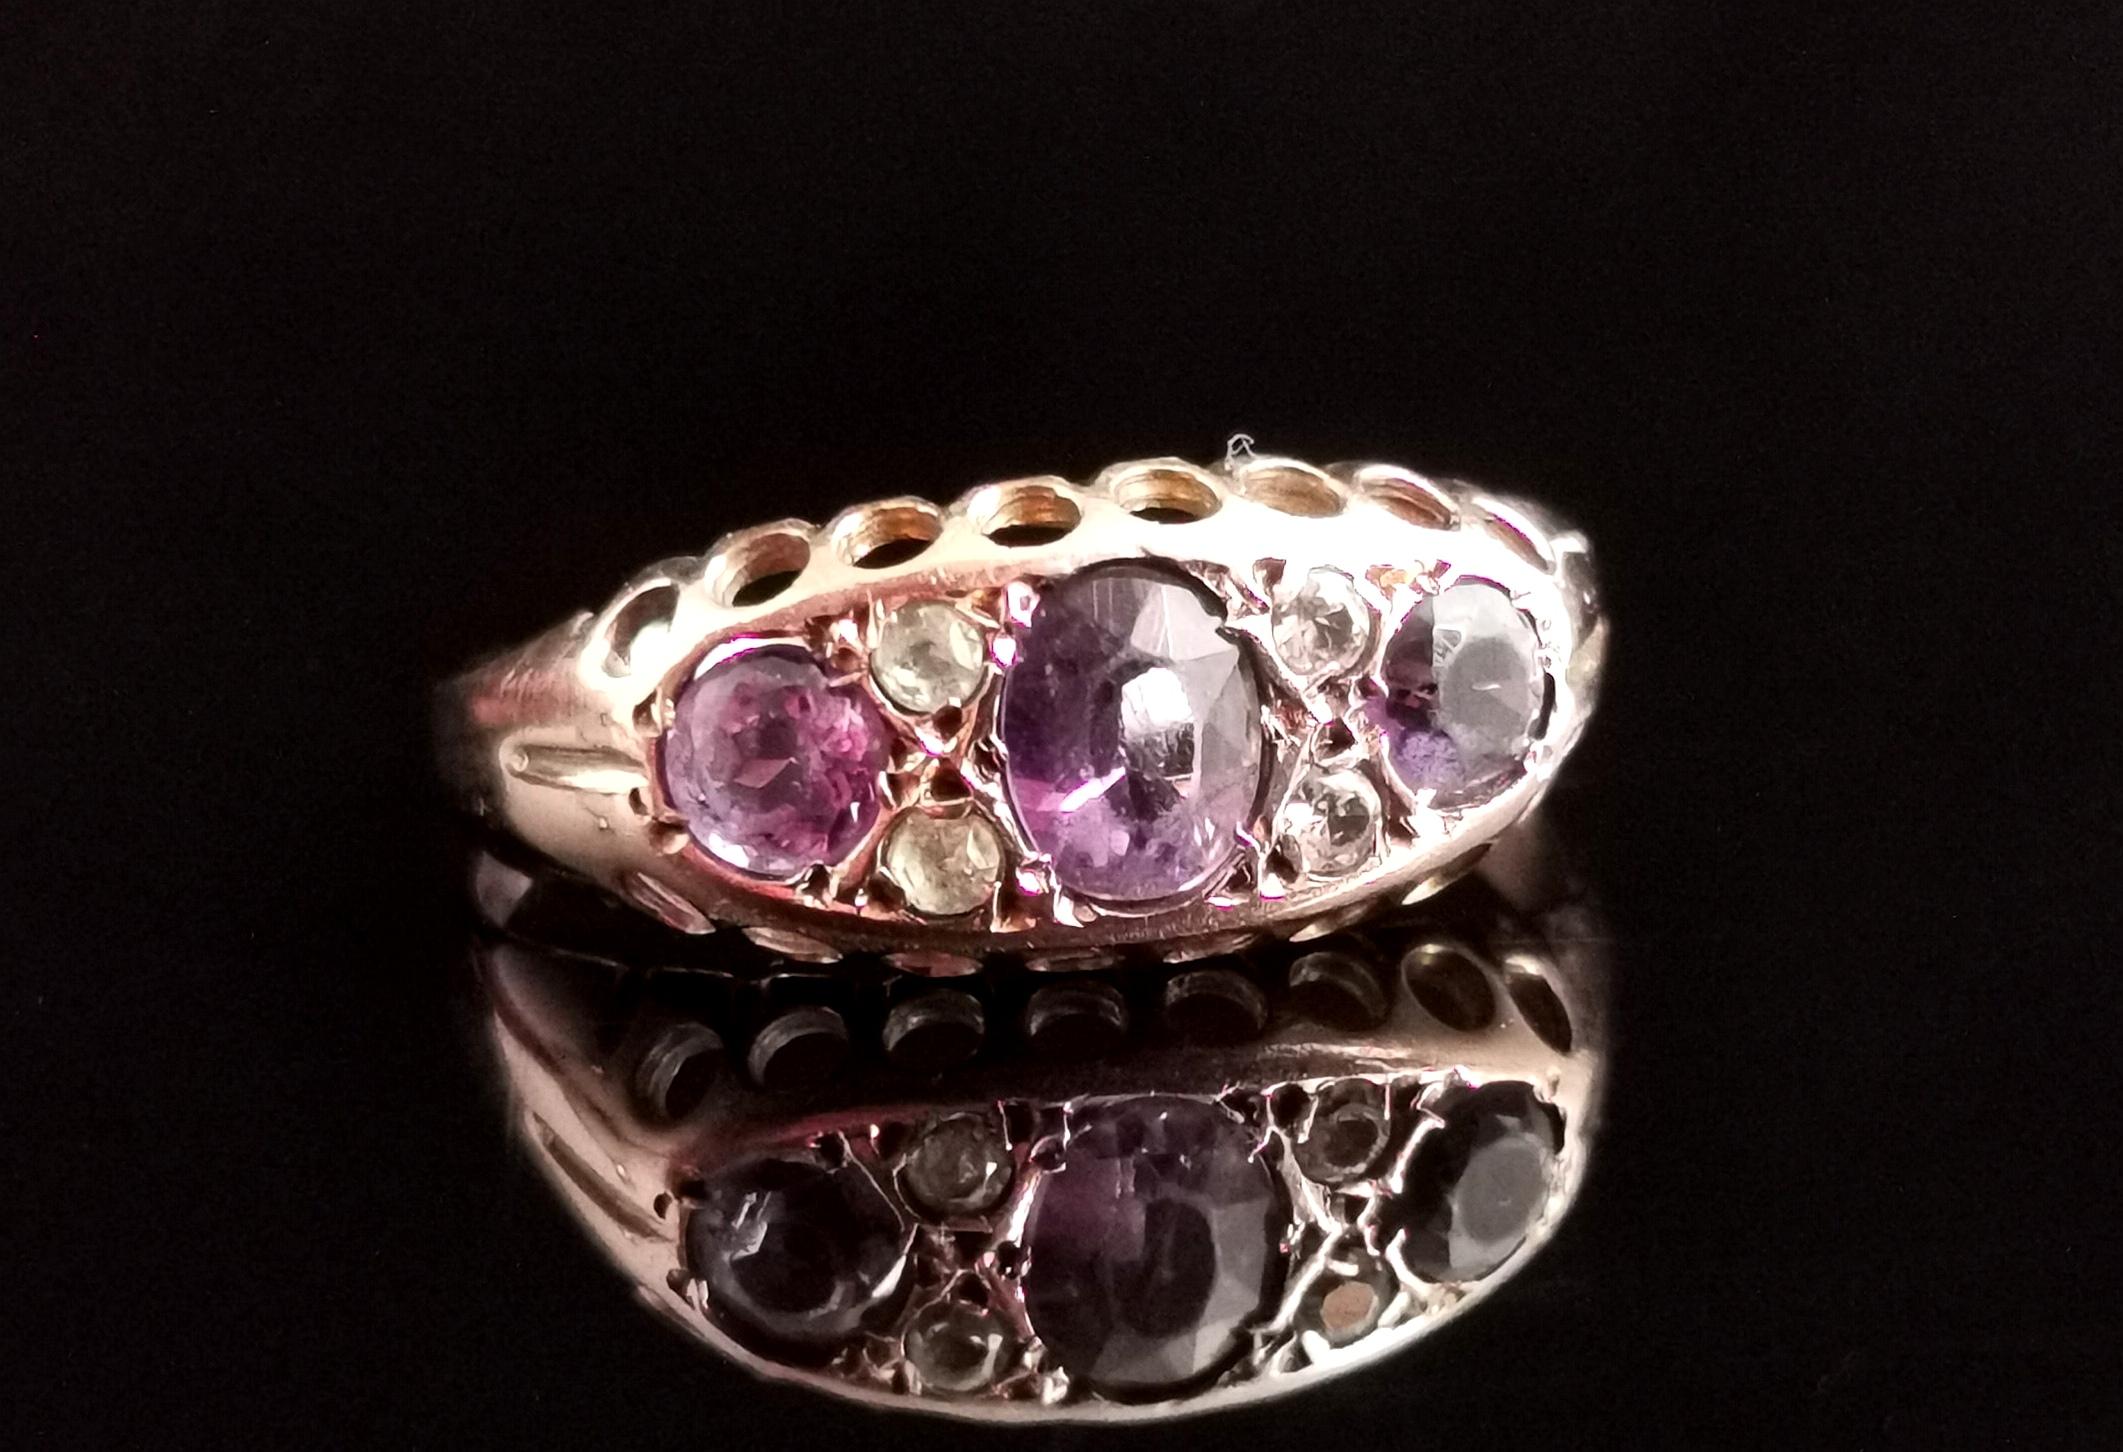 A pretty antique Amethyst and paste stone ring.

It is a boat head style ring in 9kt yellow gold.

It has three lovely mixed cut Amethyst stones with a light and rich purple tone intercepted by white paste stones.

It is marked on the inner face